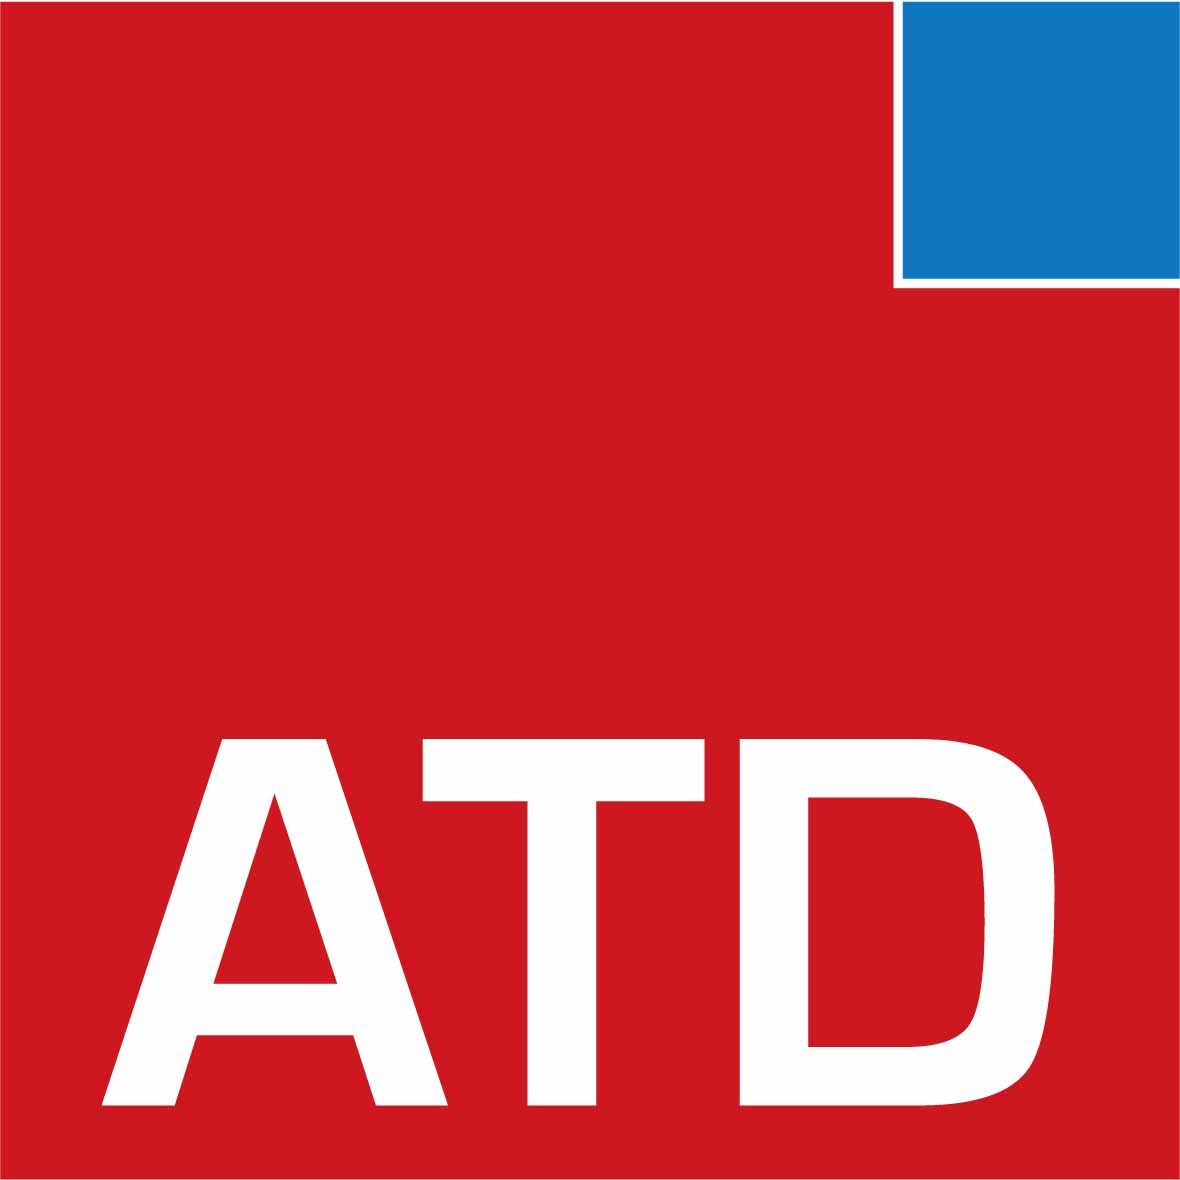 ATD Promotions Immobilier